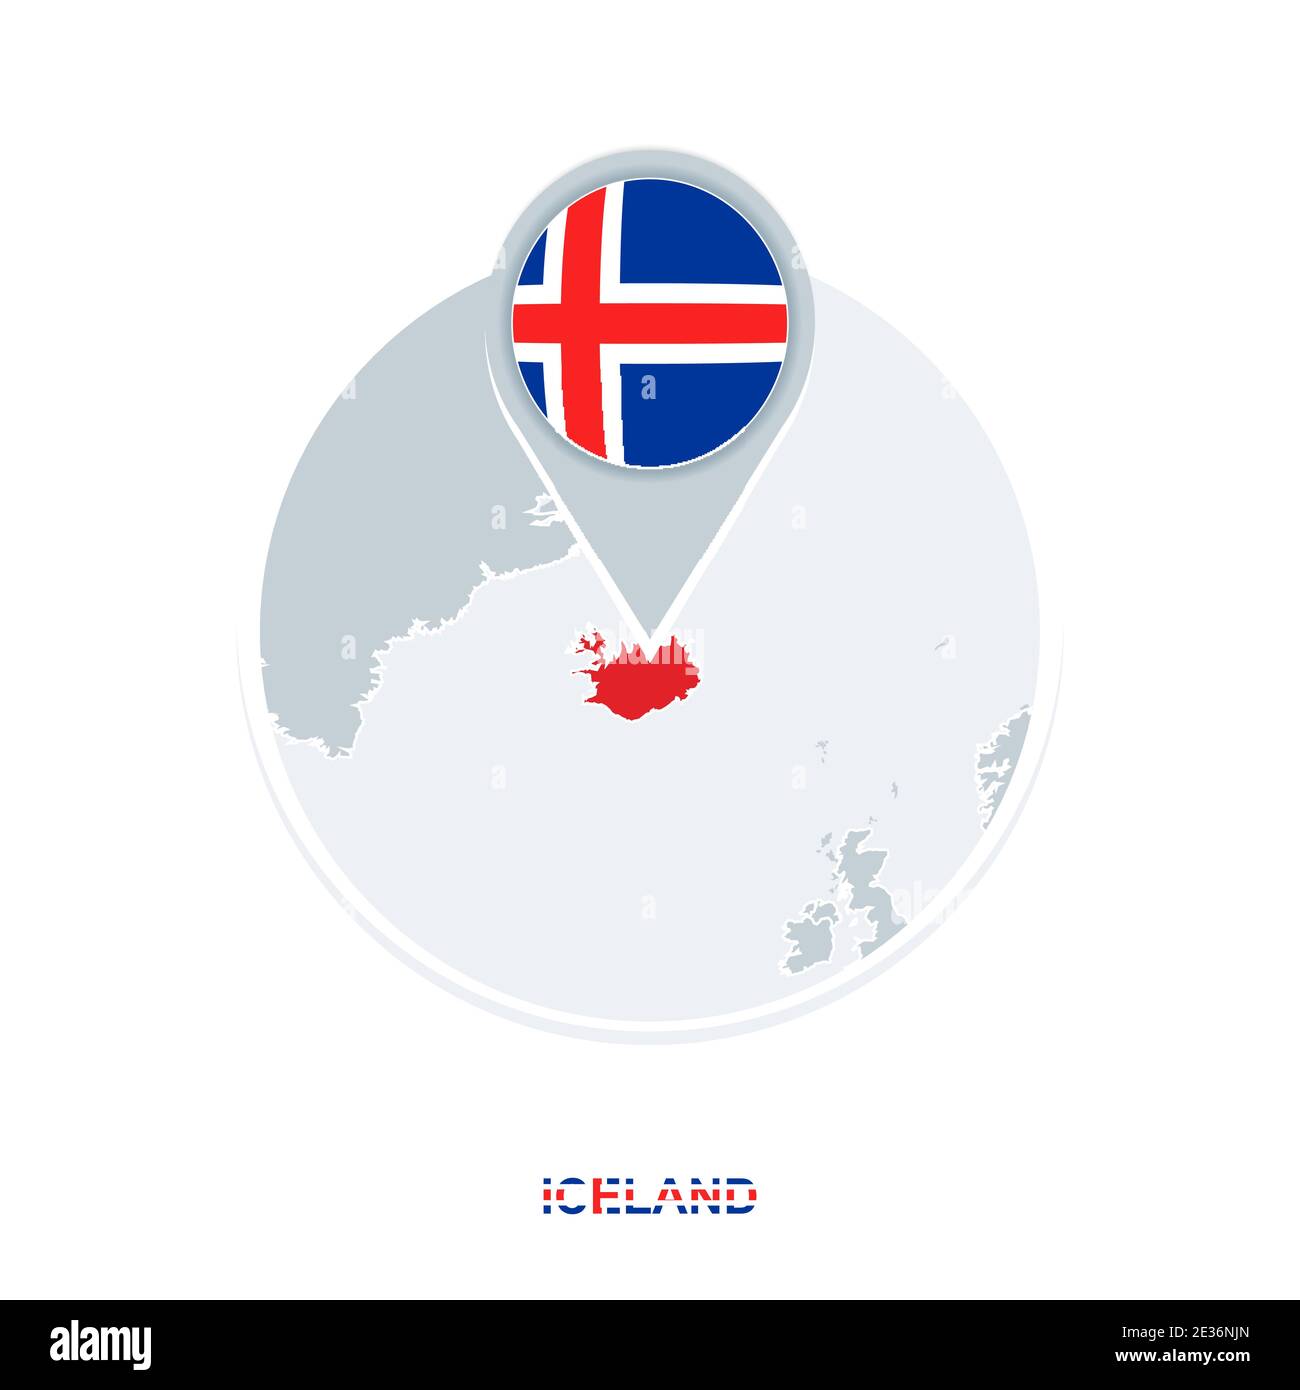 Iceland map and flag, vector map icon with highlighted Iceland Stock Vector